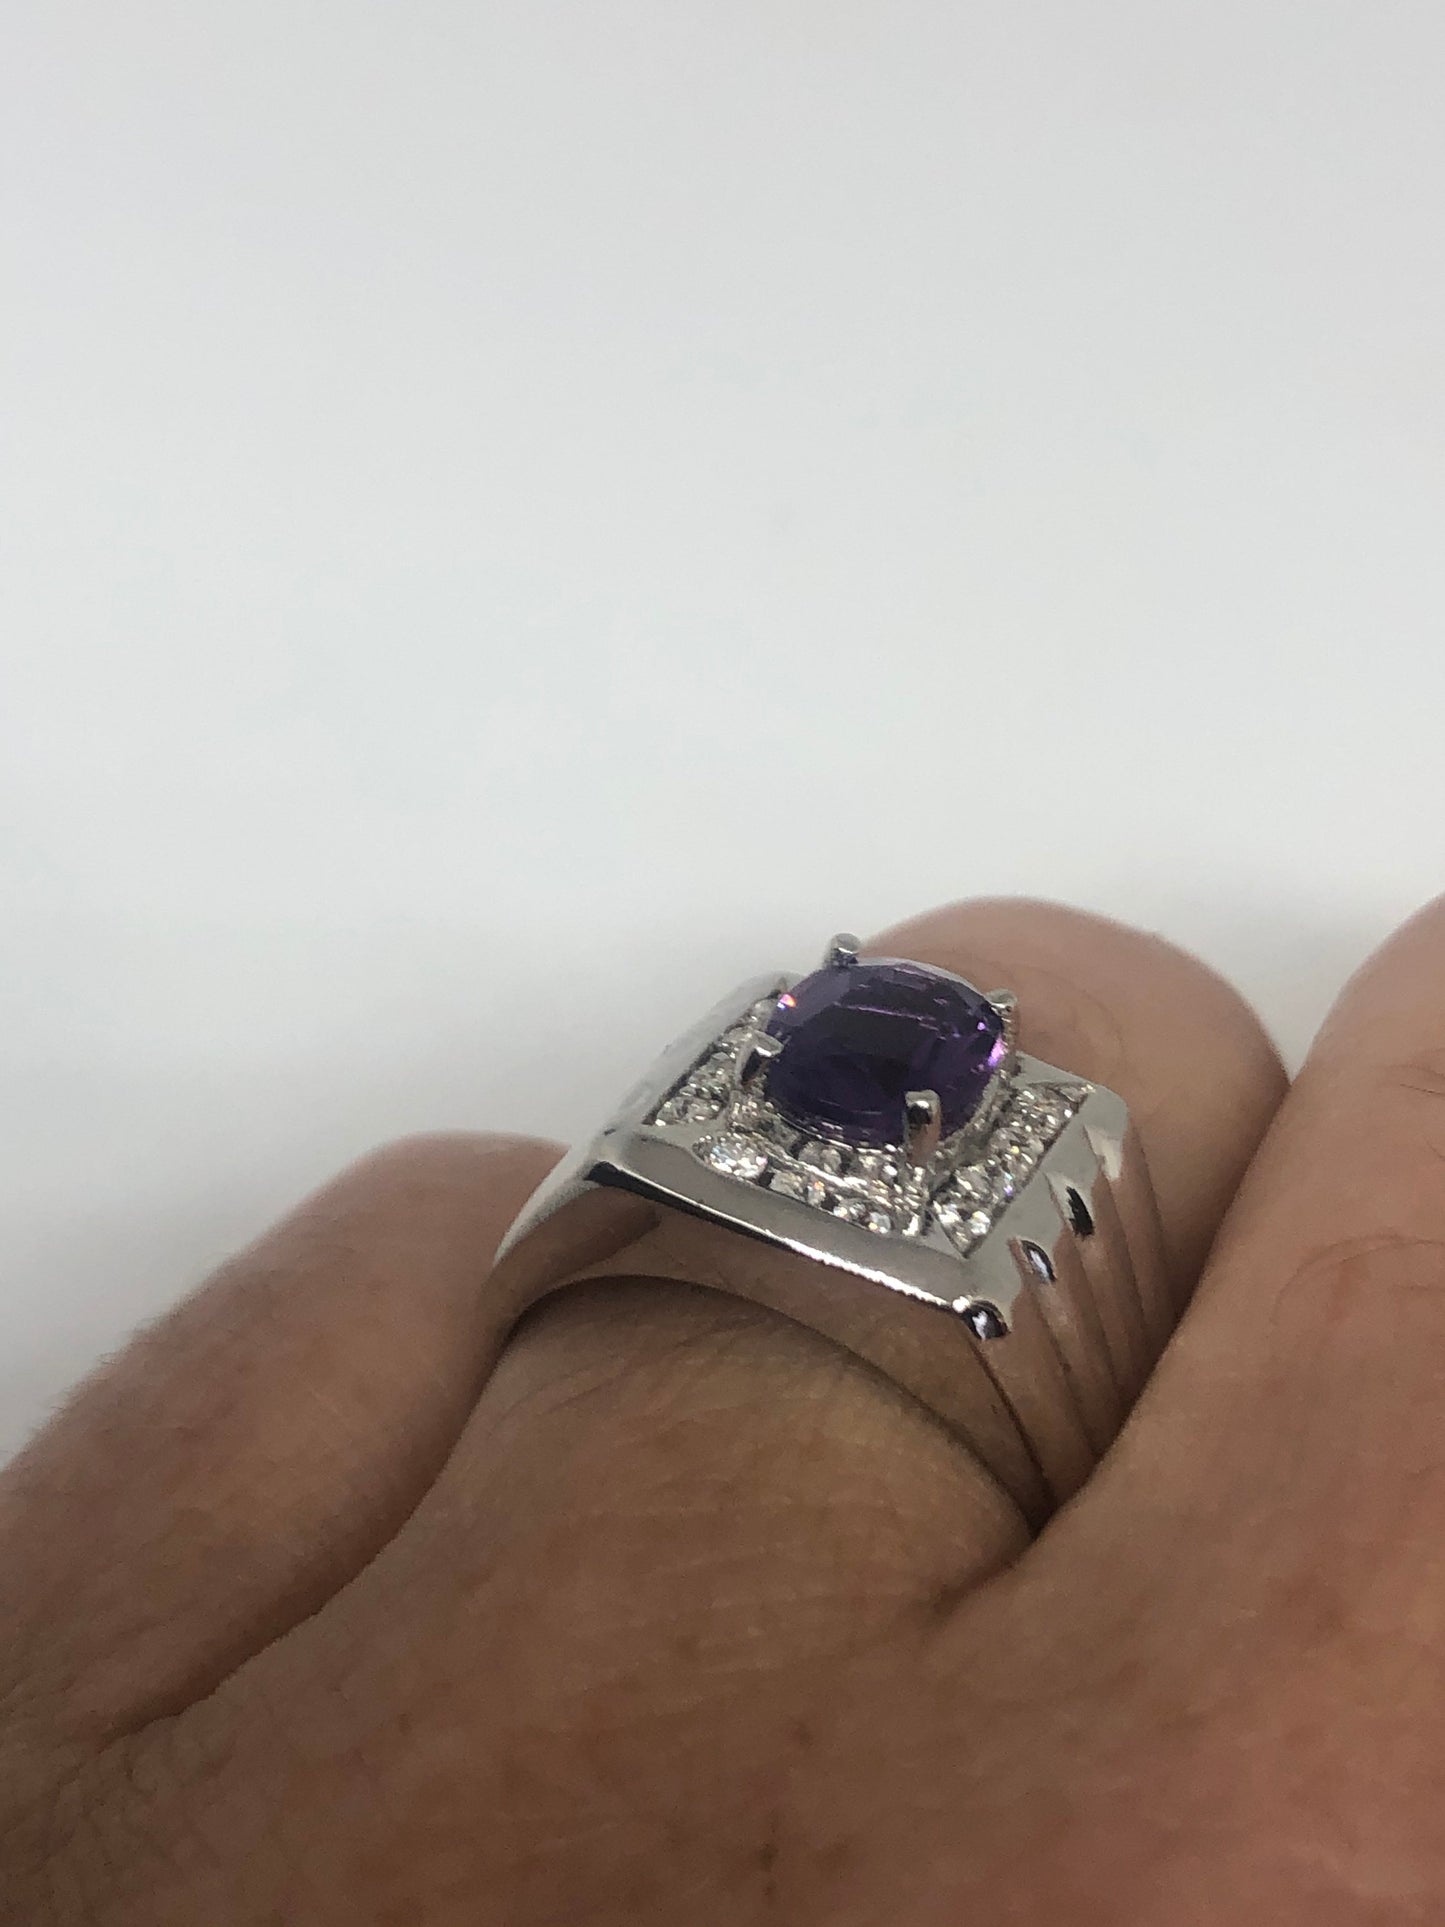 Vintage Purple Amethyst Ring 925 Sterling Silver Gothic Size 7